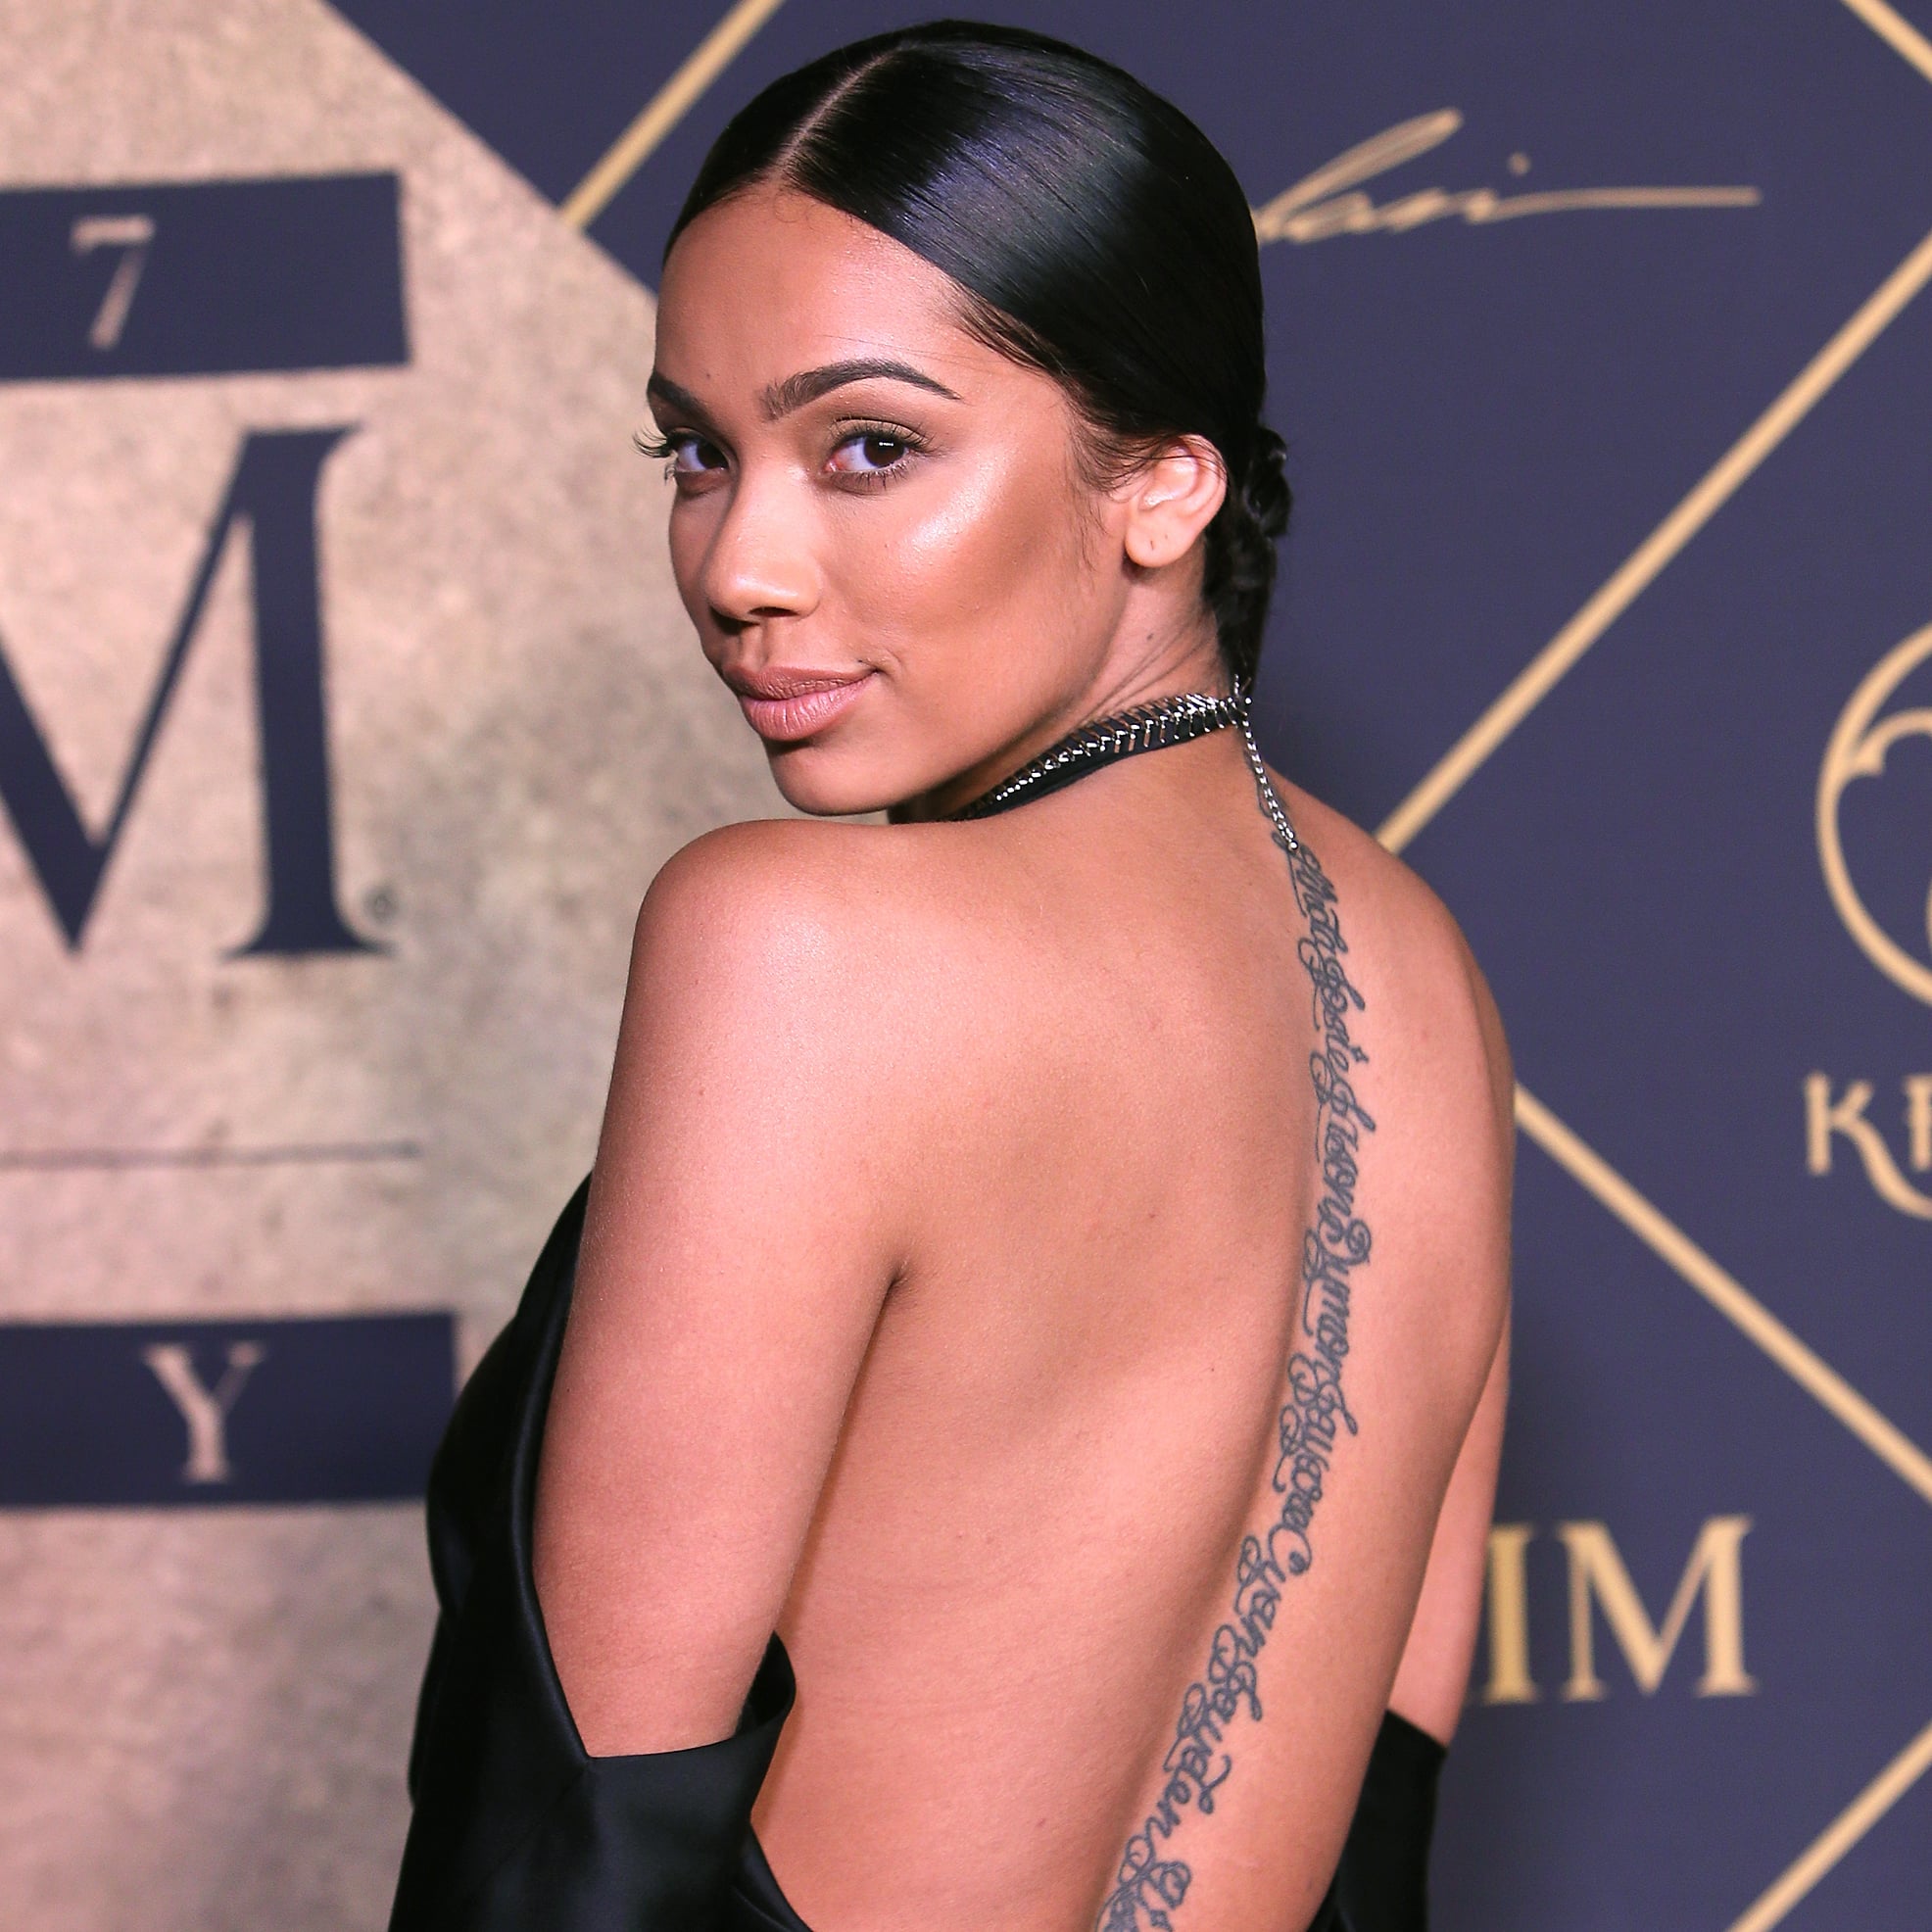 Celebrity Spine Tattoos That Are Sexy and Hidden  POPSUGAR Beauty